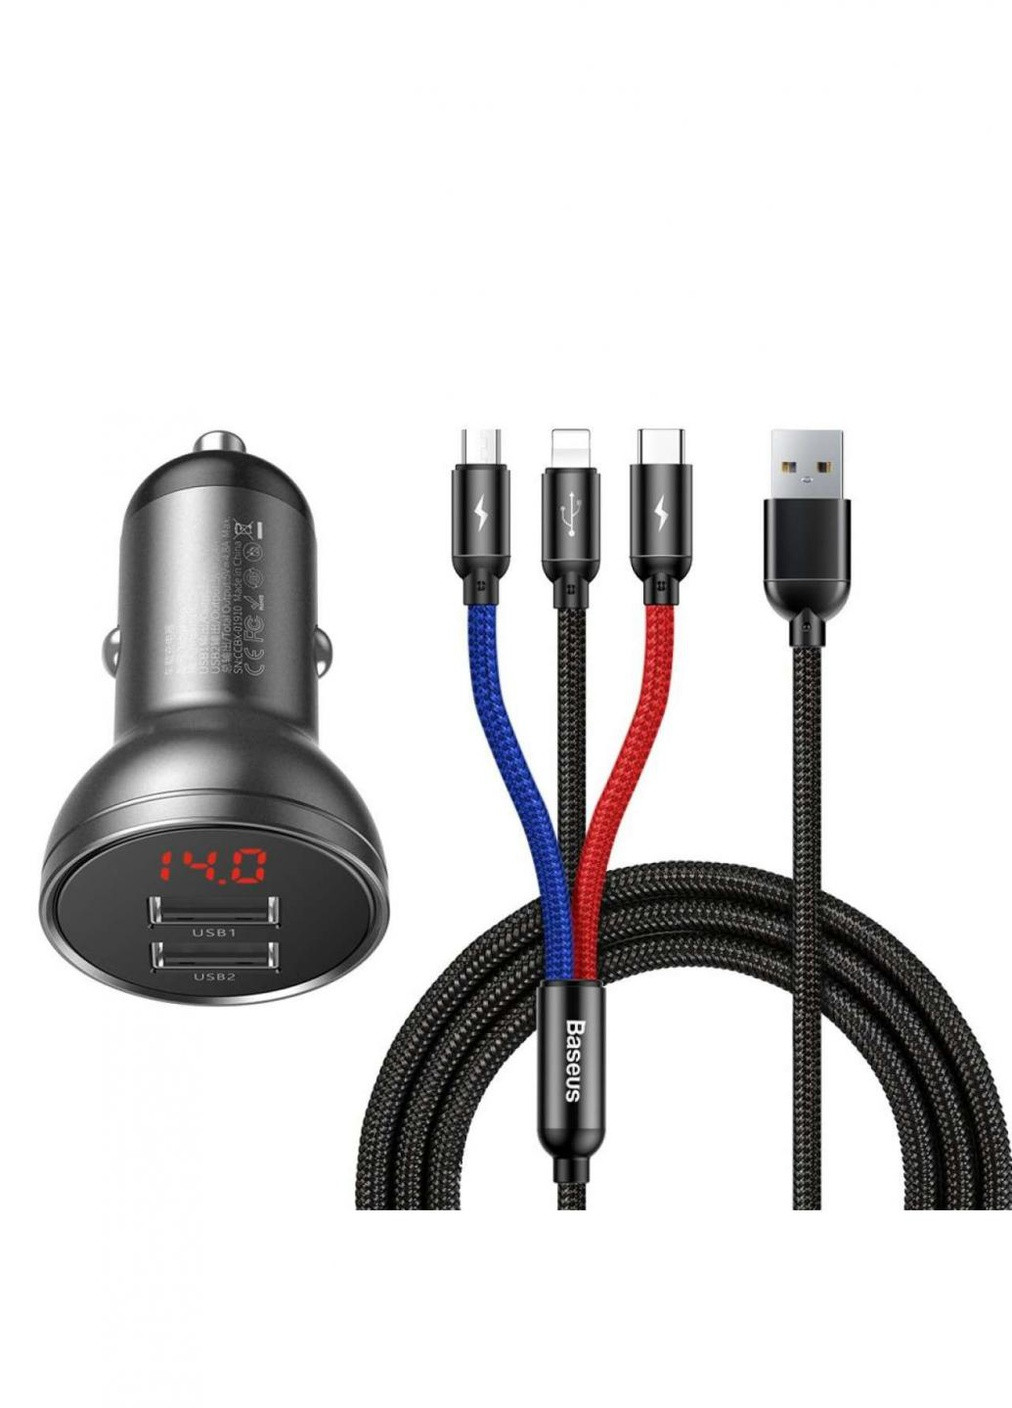 АЗУ Digital Display Dual USB 4.8A Car Charger 24W with Three Primary Colors 3-in-1 Cable USB Baseus (259318273)